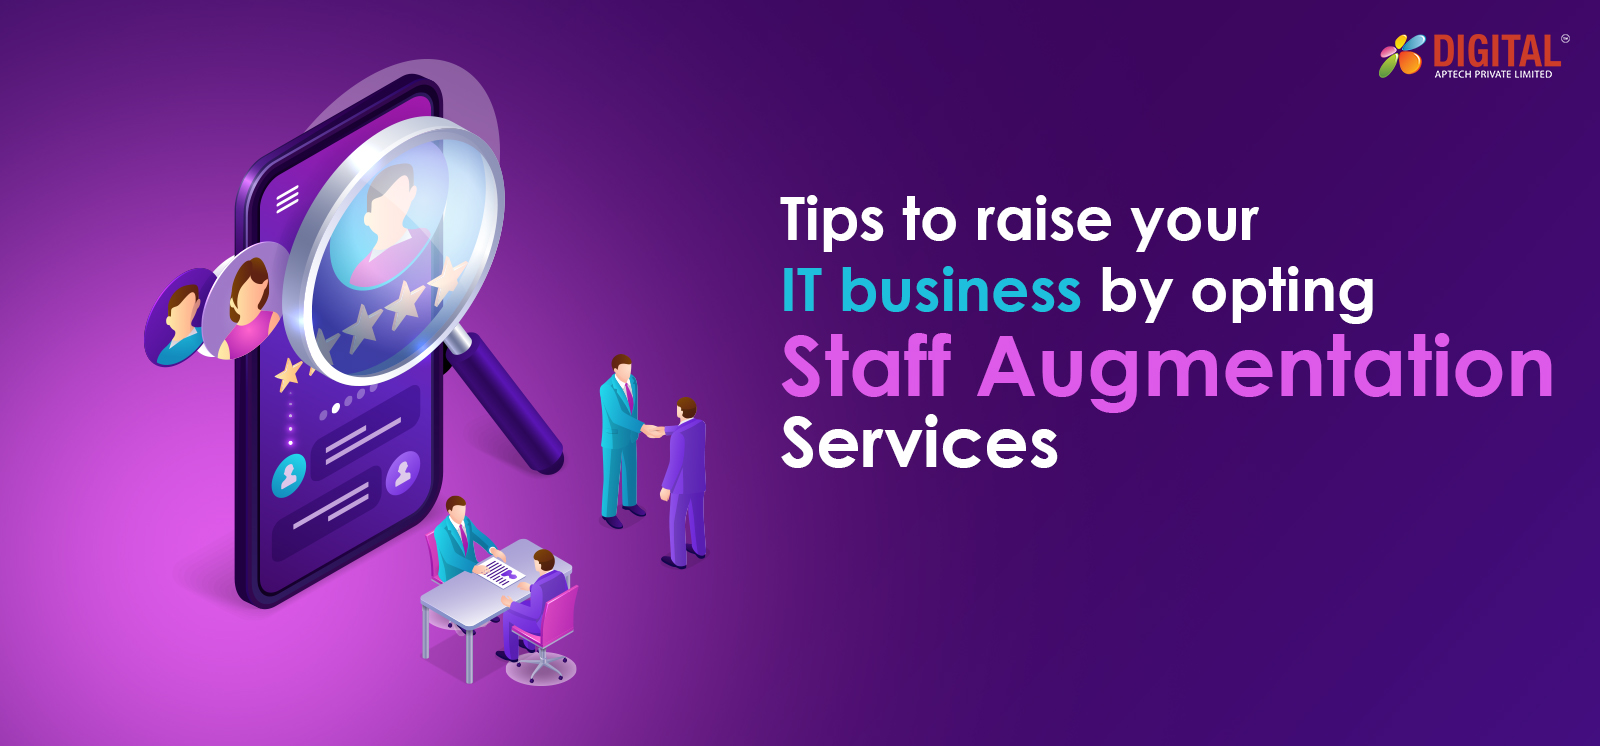 Tips to raise your IT business by opting for IT Staff Augmentation Services